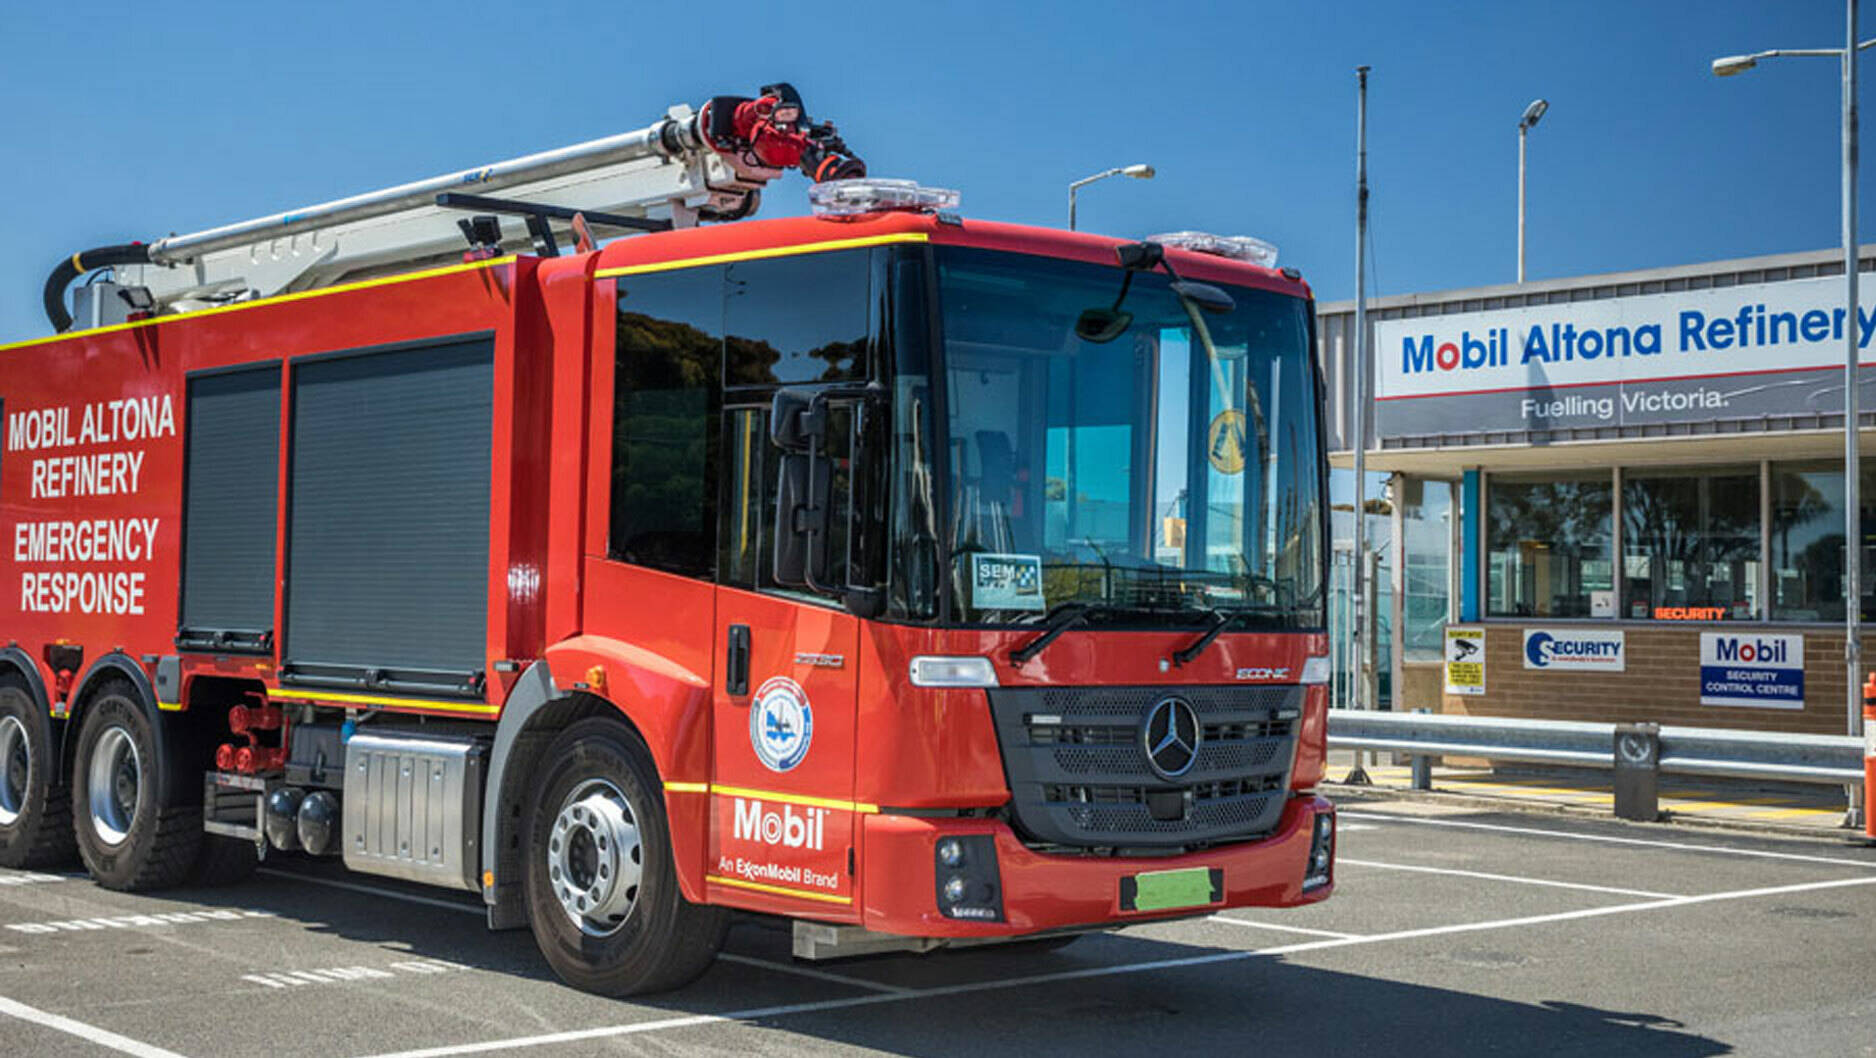 Image PhotoThe new fire truck will significantly bolster Altona Refinery's emergency response capabilities.